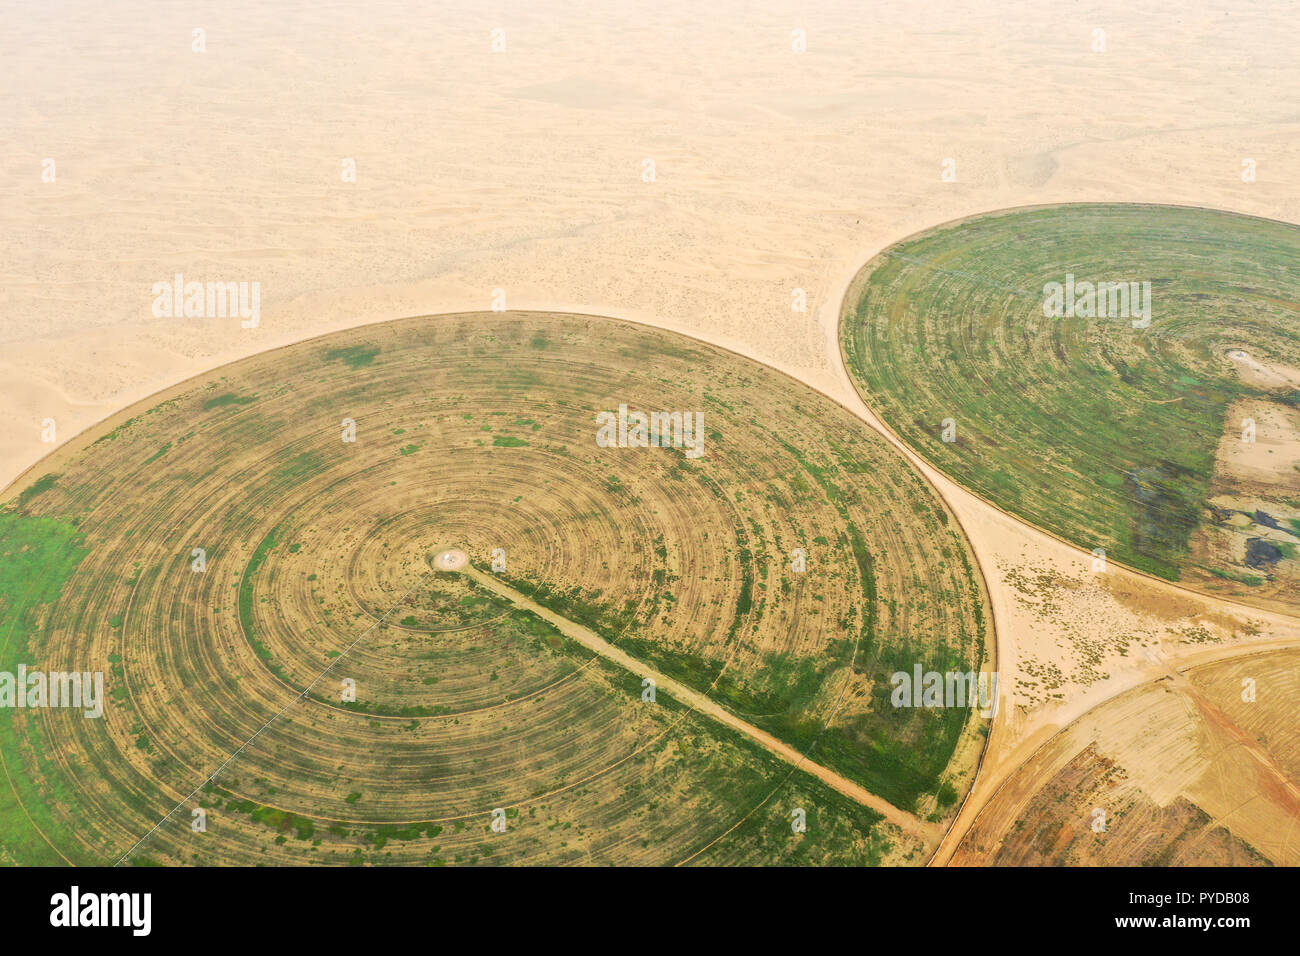 Circular green irrigation patches for agriculture in the desert. Dubai, UAE. Stock Photo